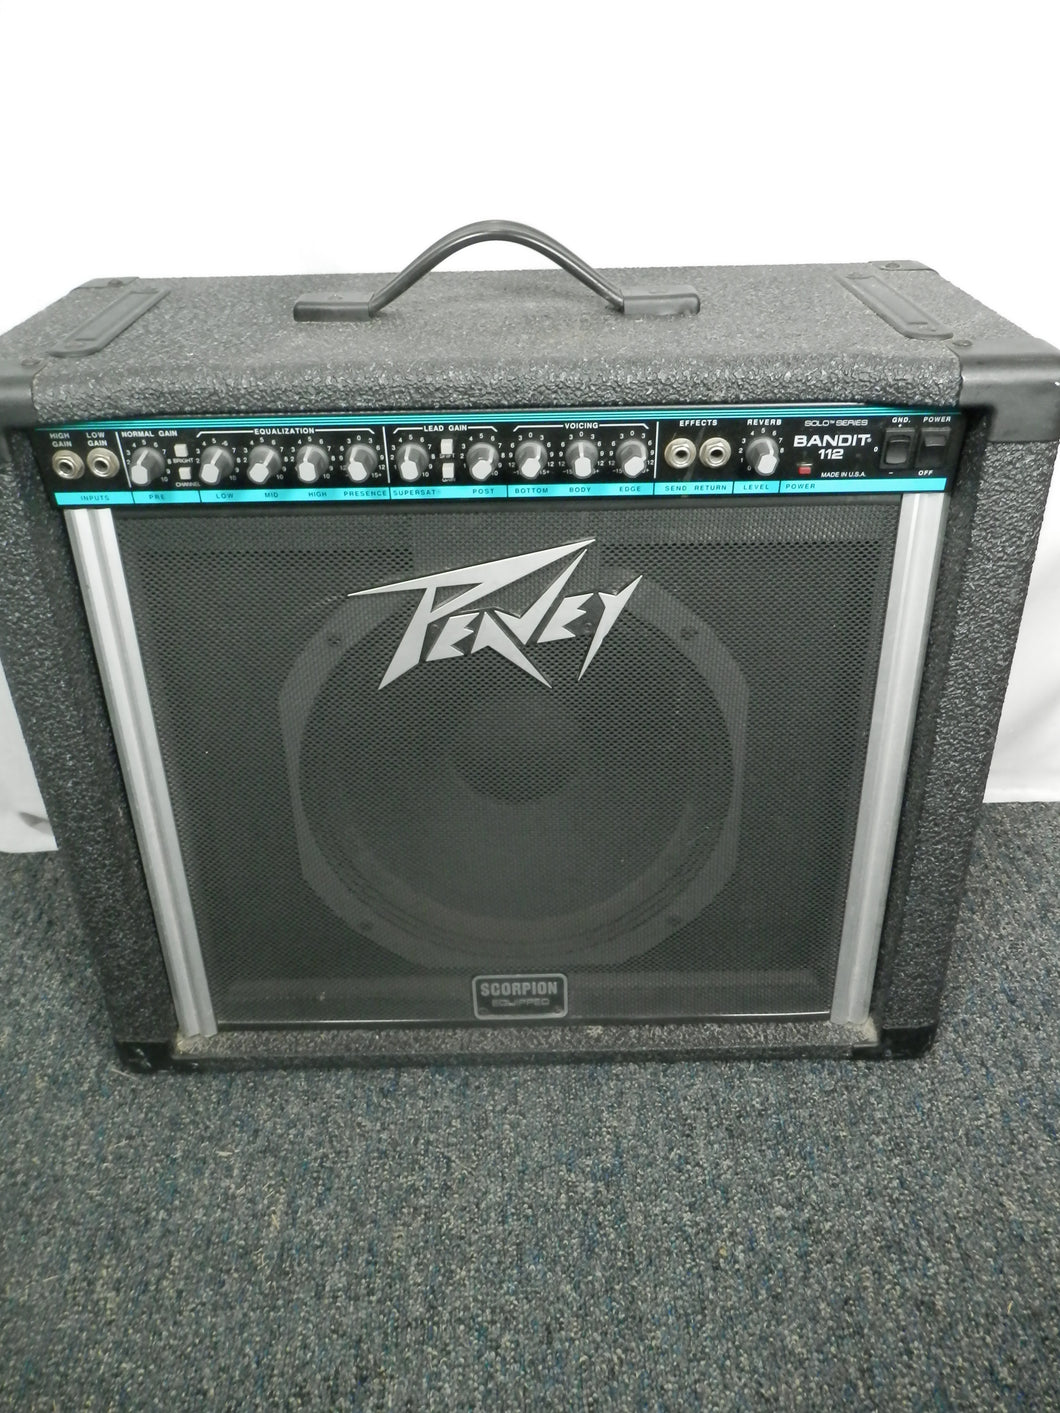 Peavey Bandit 112 Scorpion Equipped guitar combo amp used